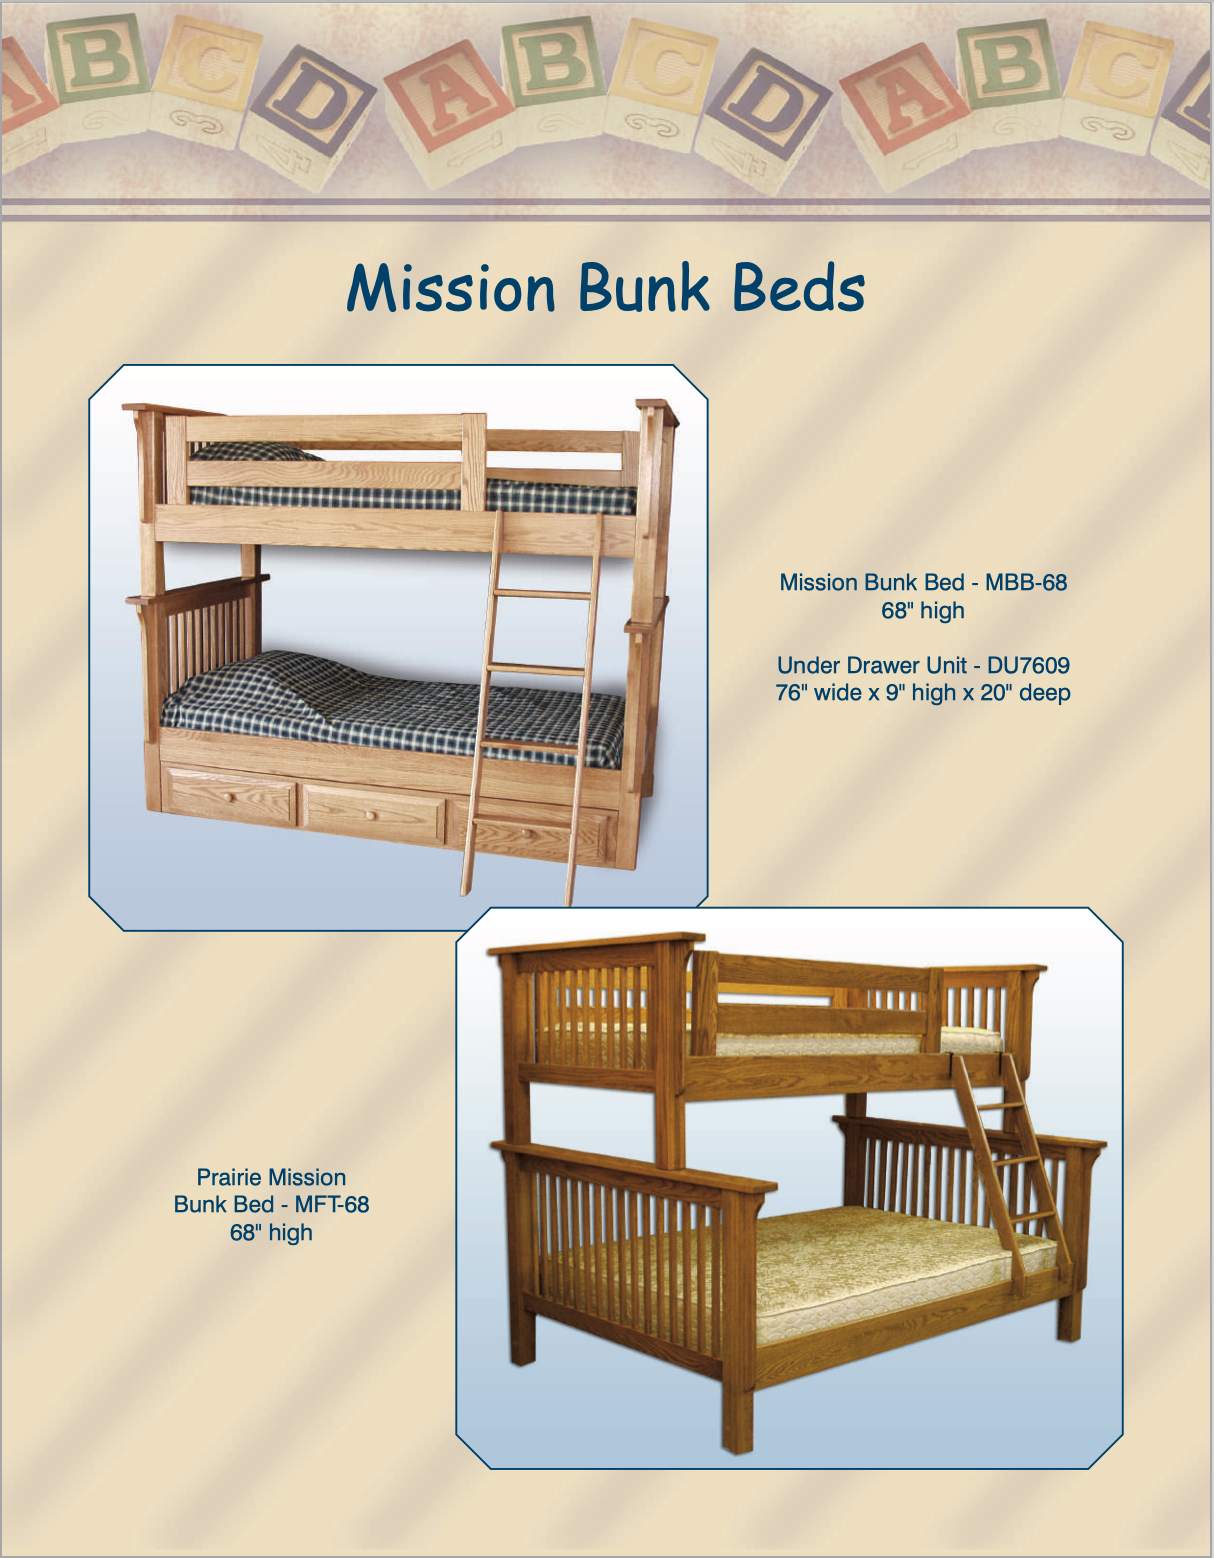 Miller’s Mission Twin Over Full Bunk Bed